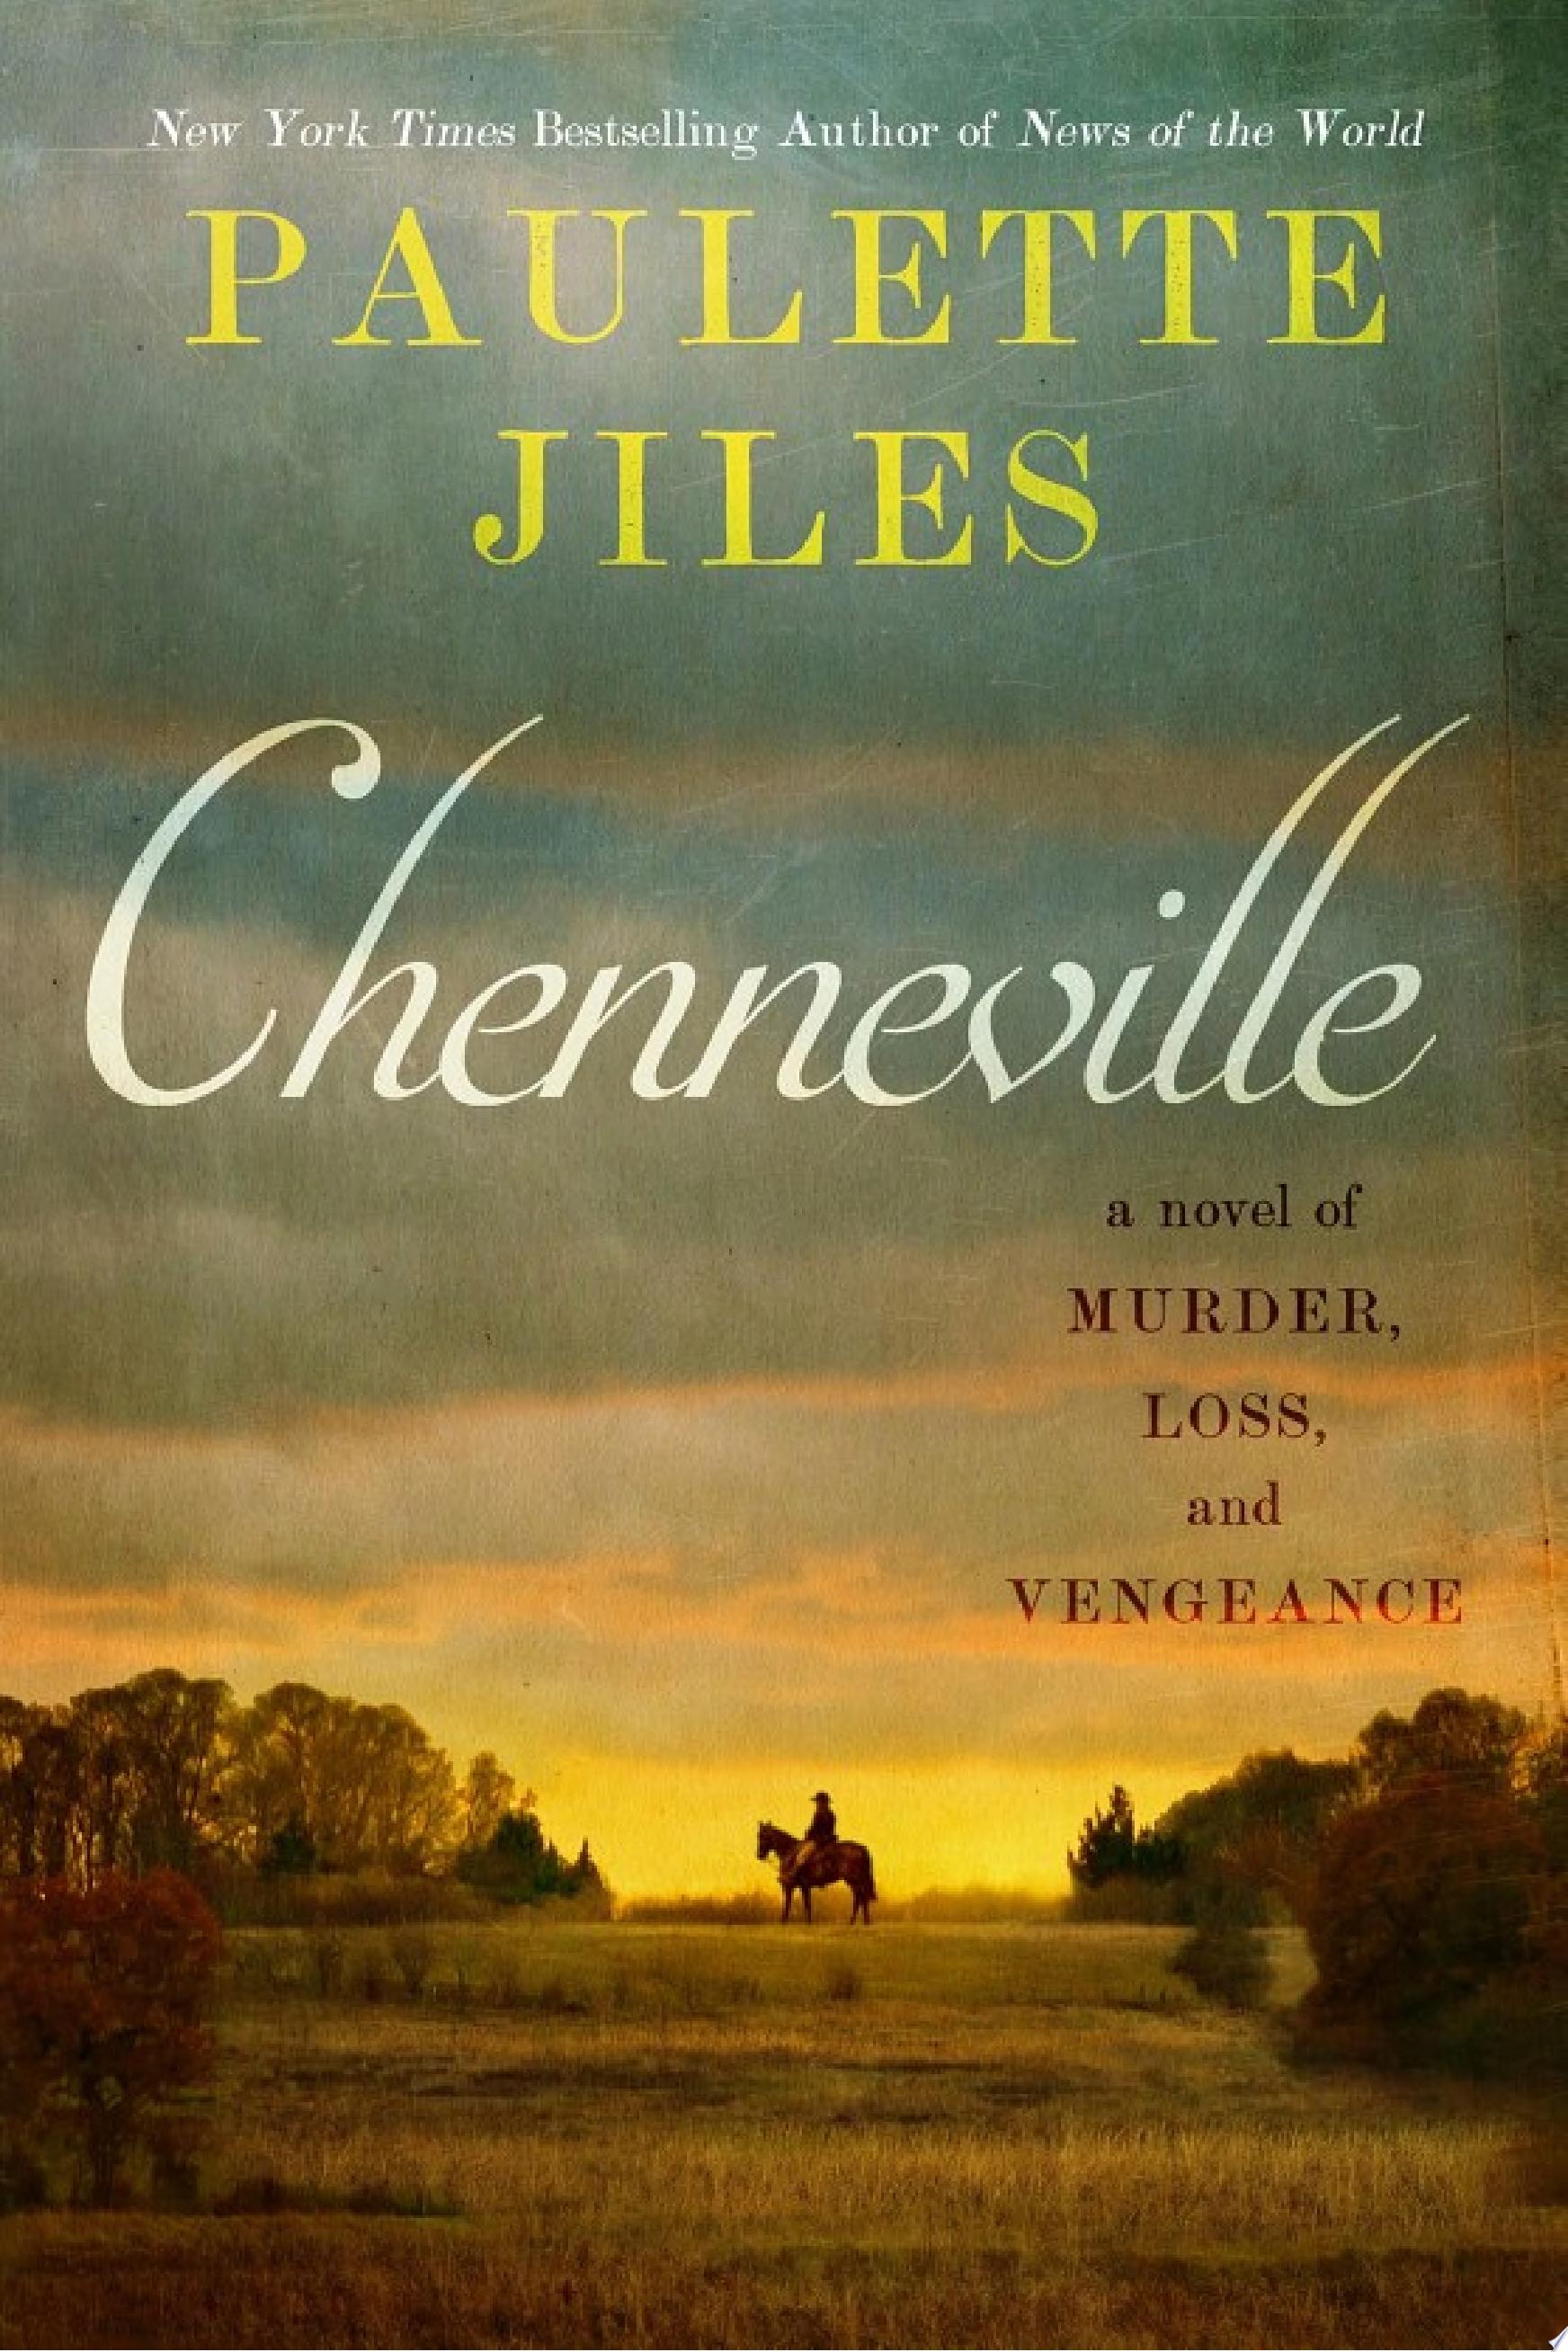 Image for "Chenneville"